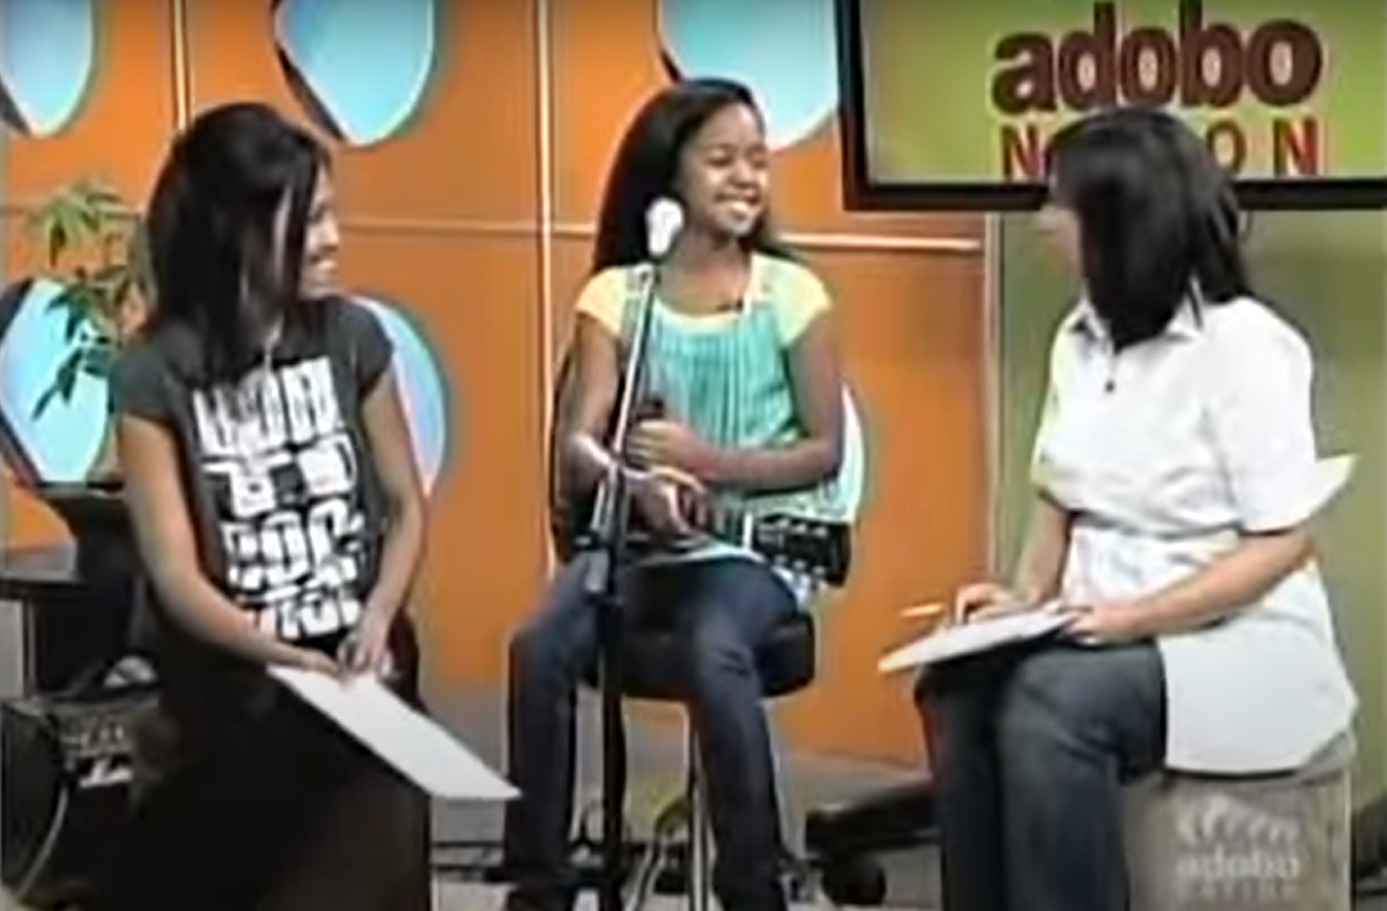 H.E.R. on Adobo Nation holding a guitar and being interviewed by two people when she was 11